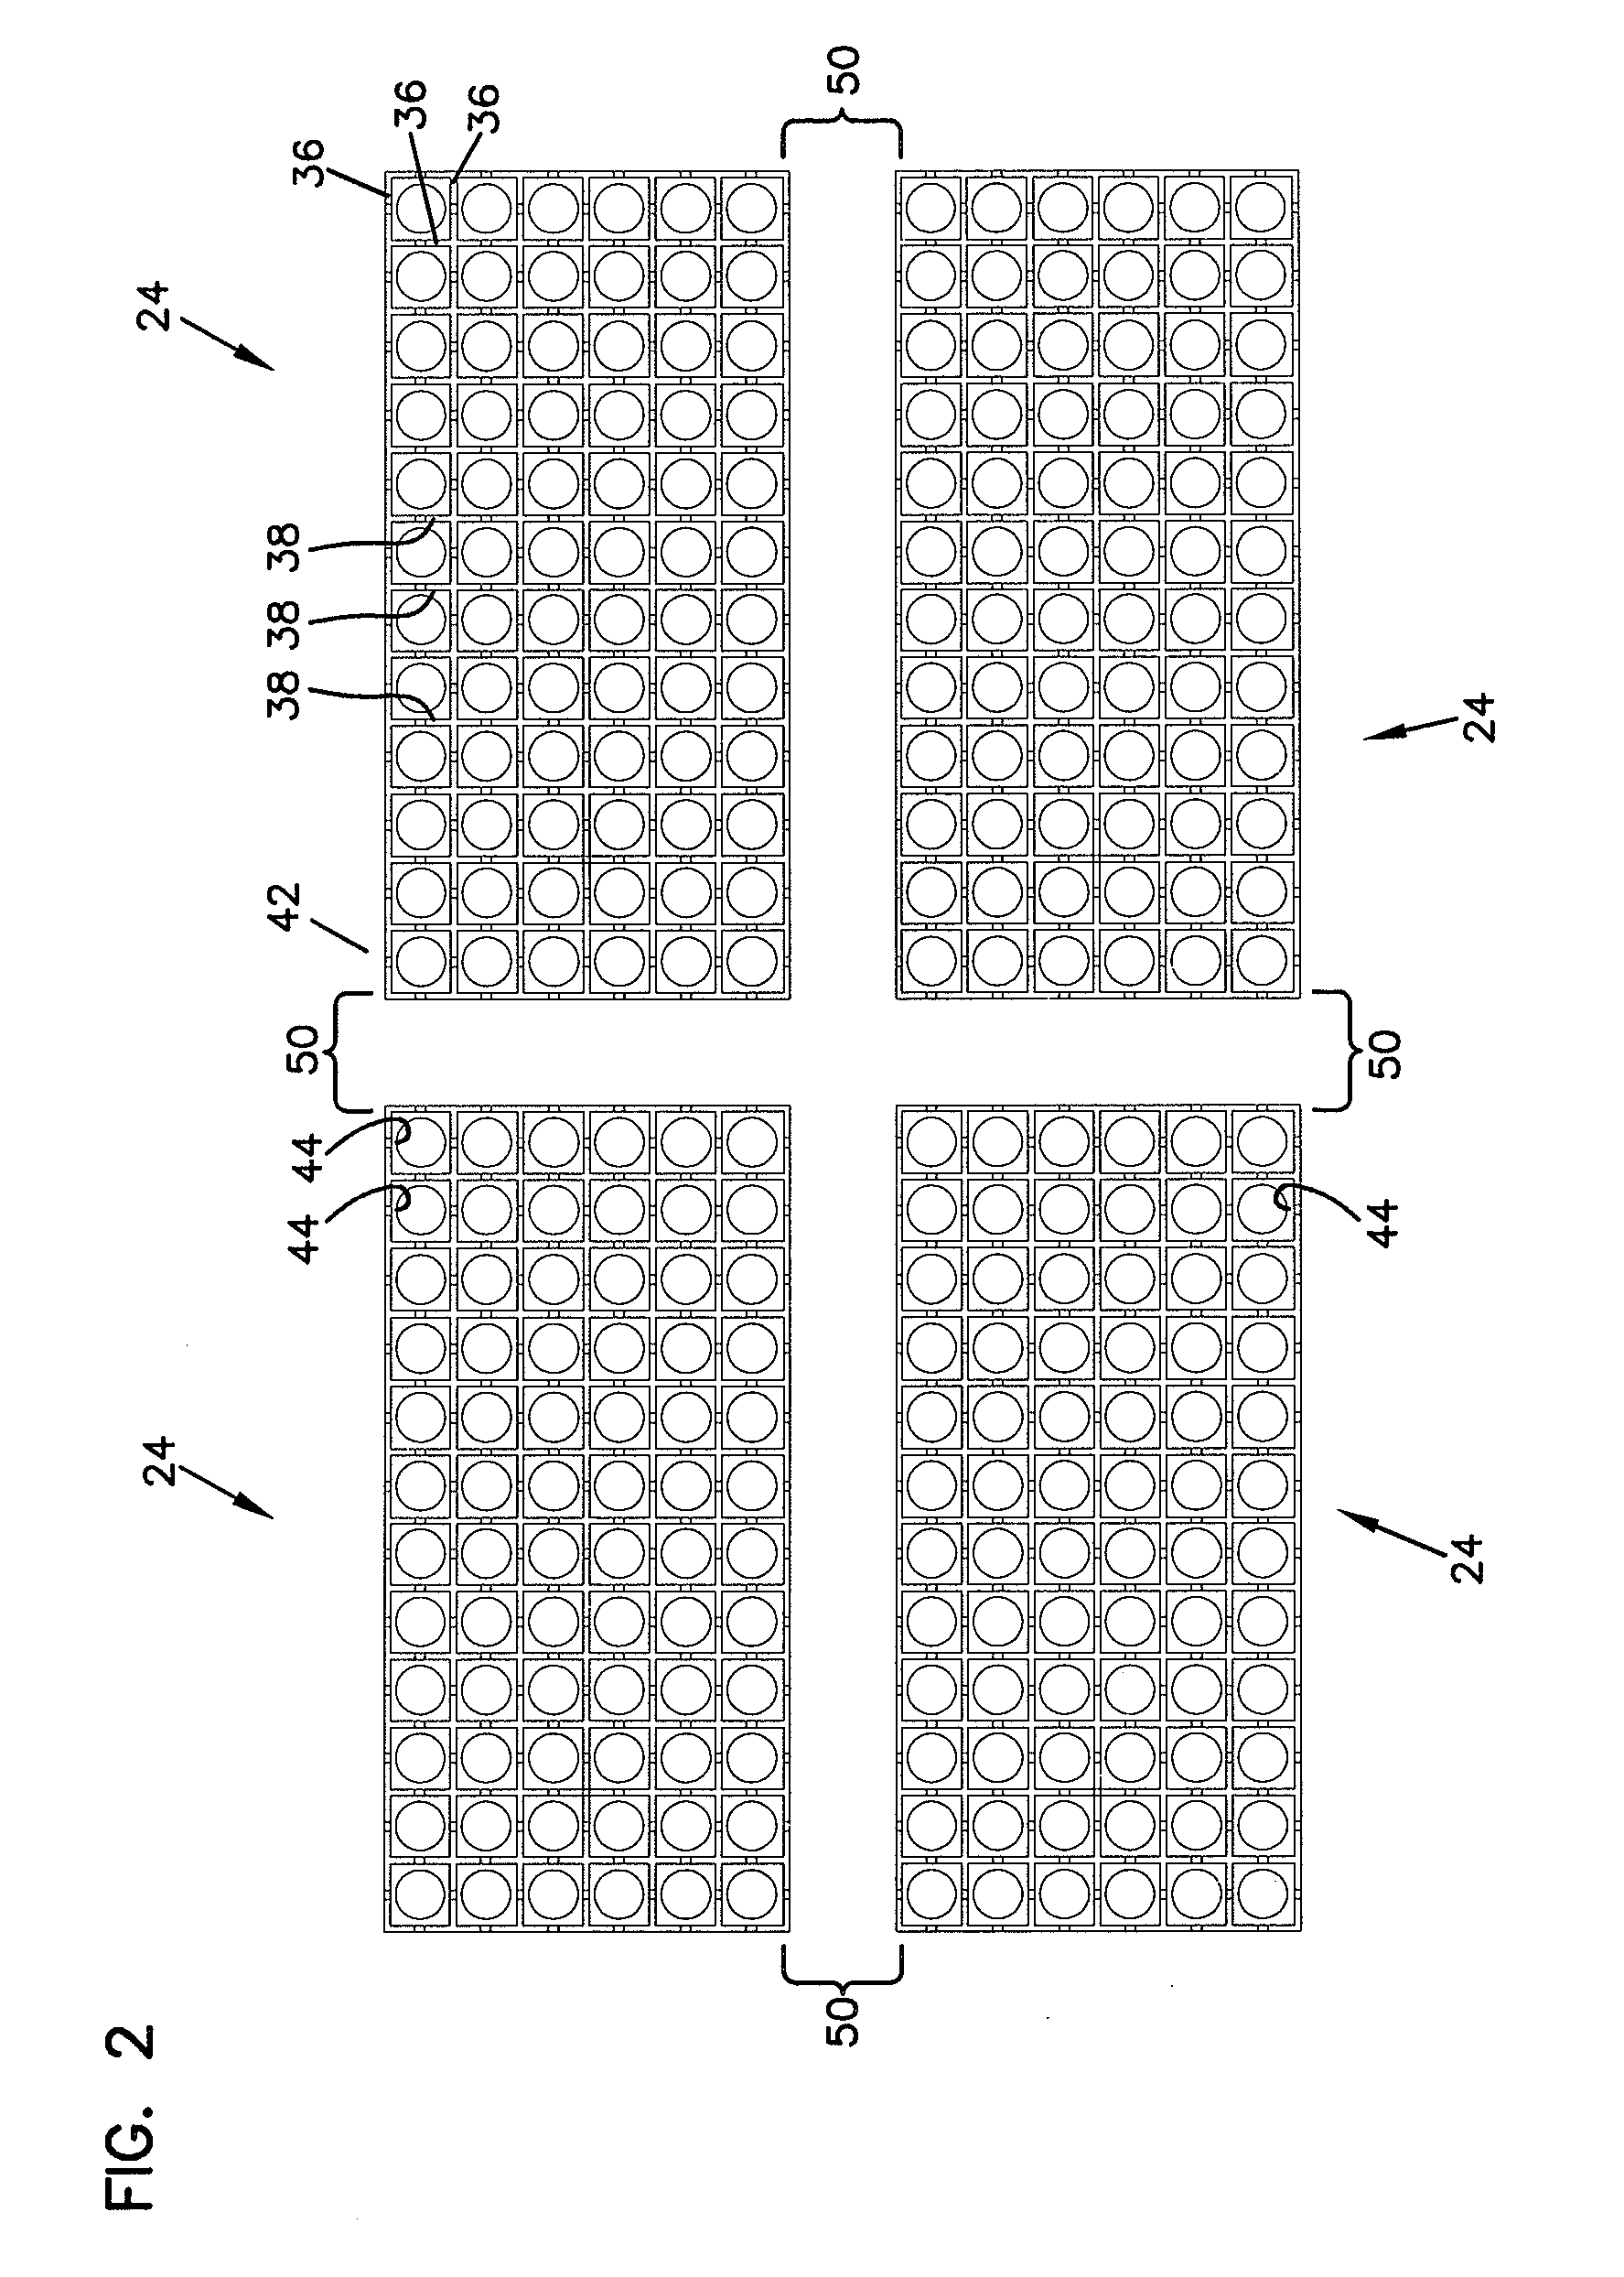 Clamp device for portable porous pavement system